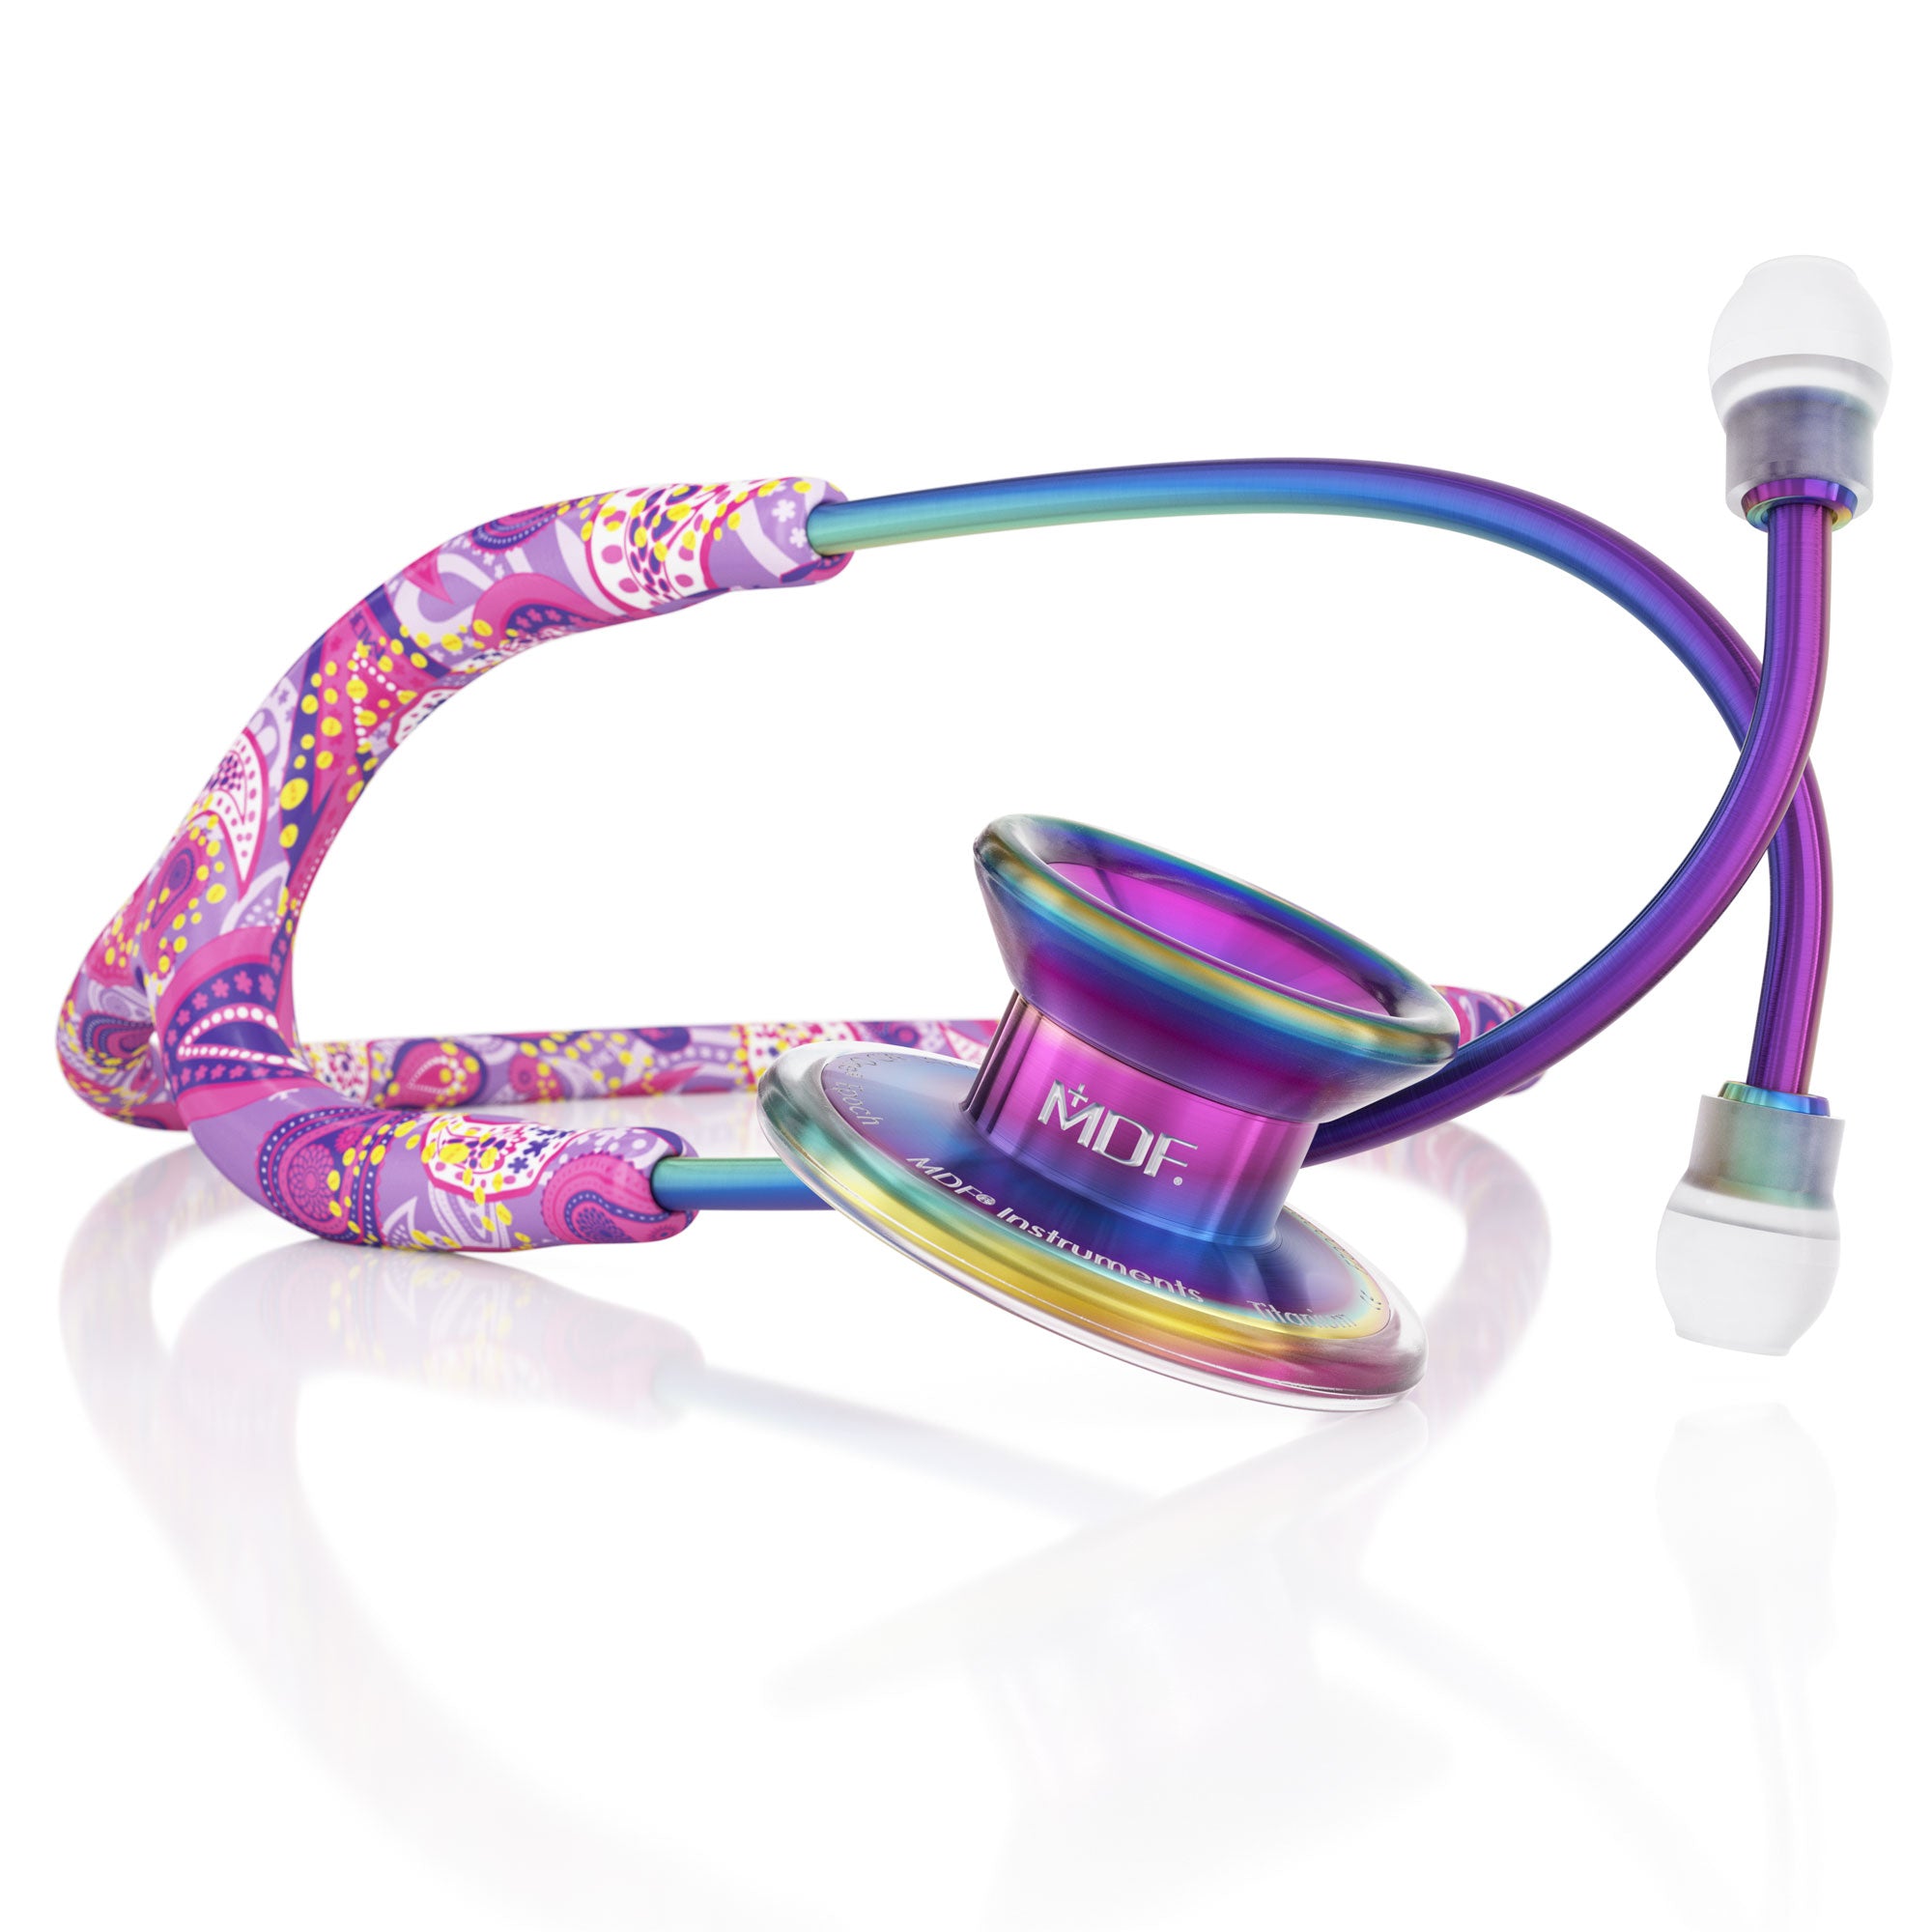 MDF® MD One® Epoch® Purpaisely stethoscope